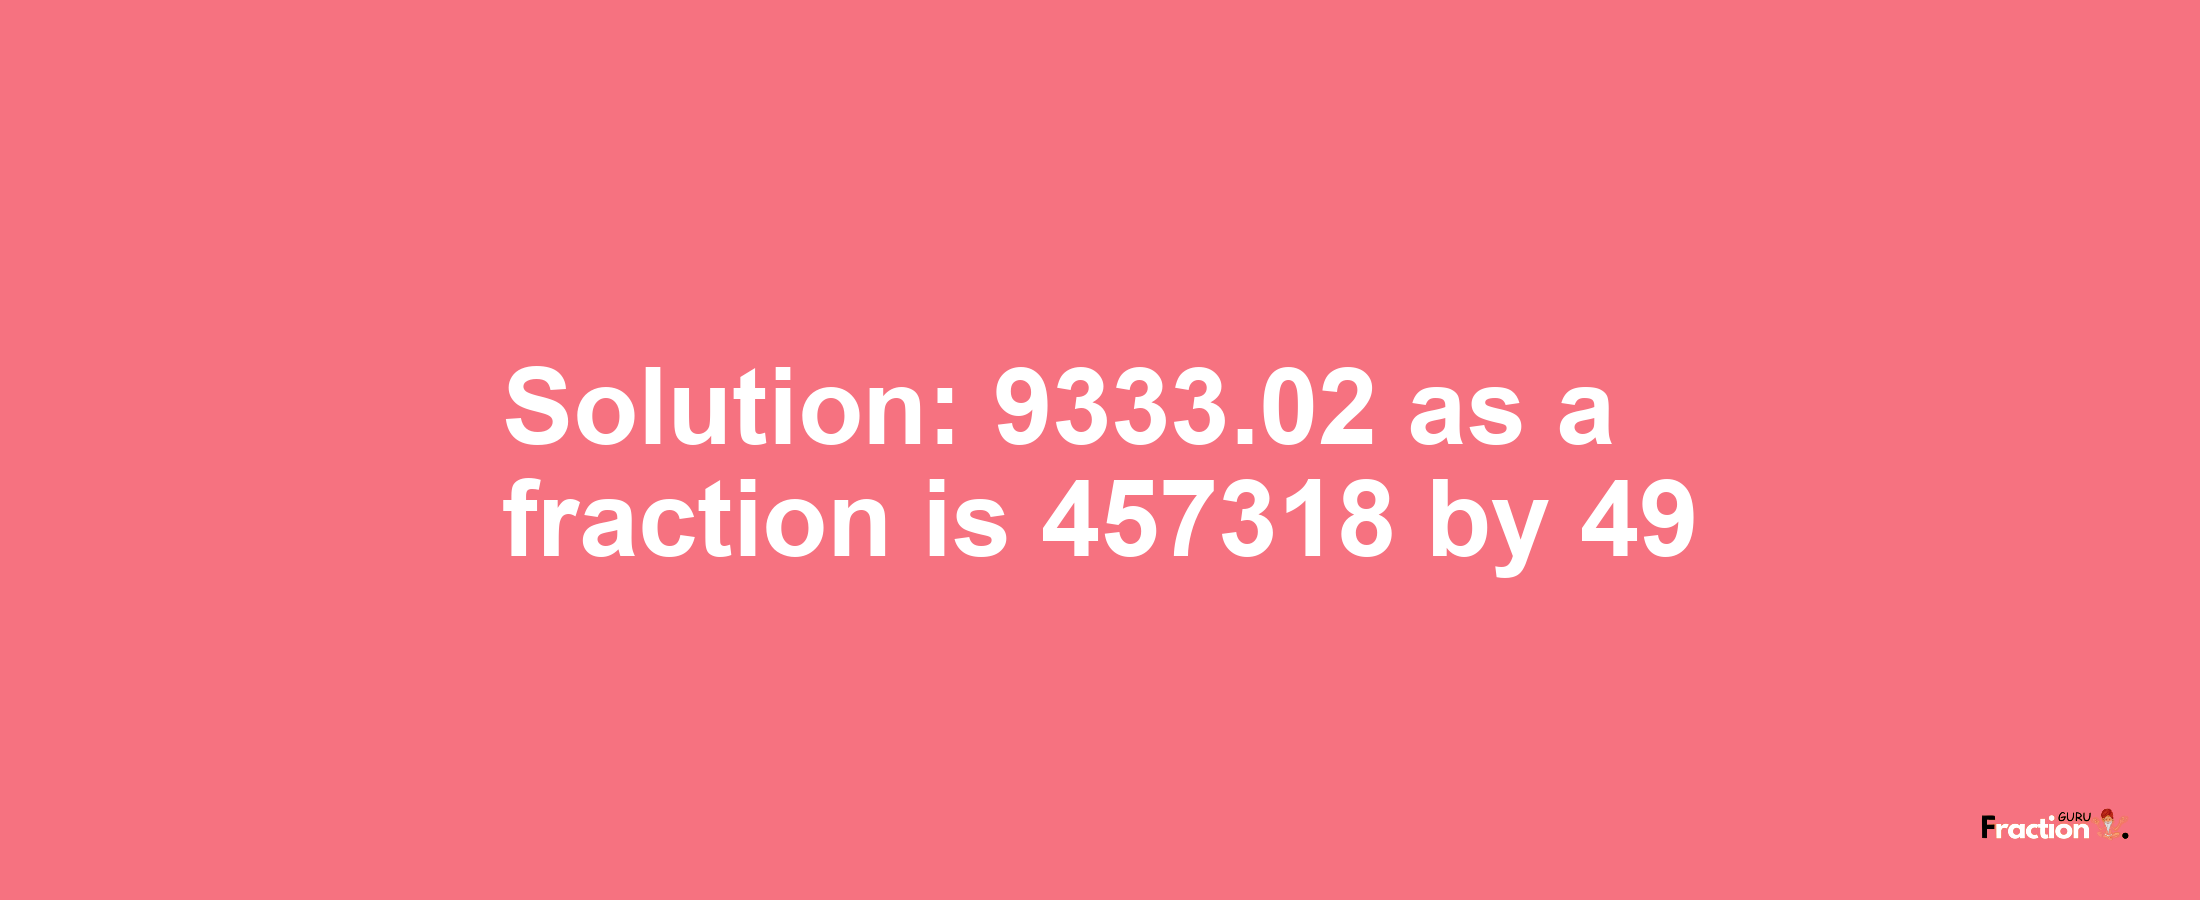 Solution:9333.02 as a fraction is 457318/49